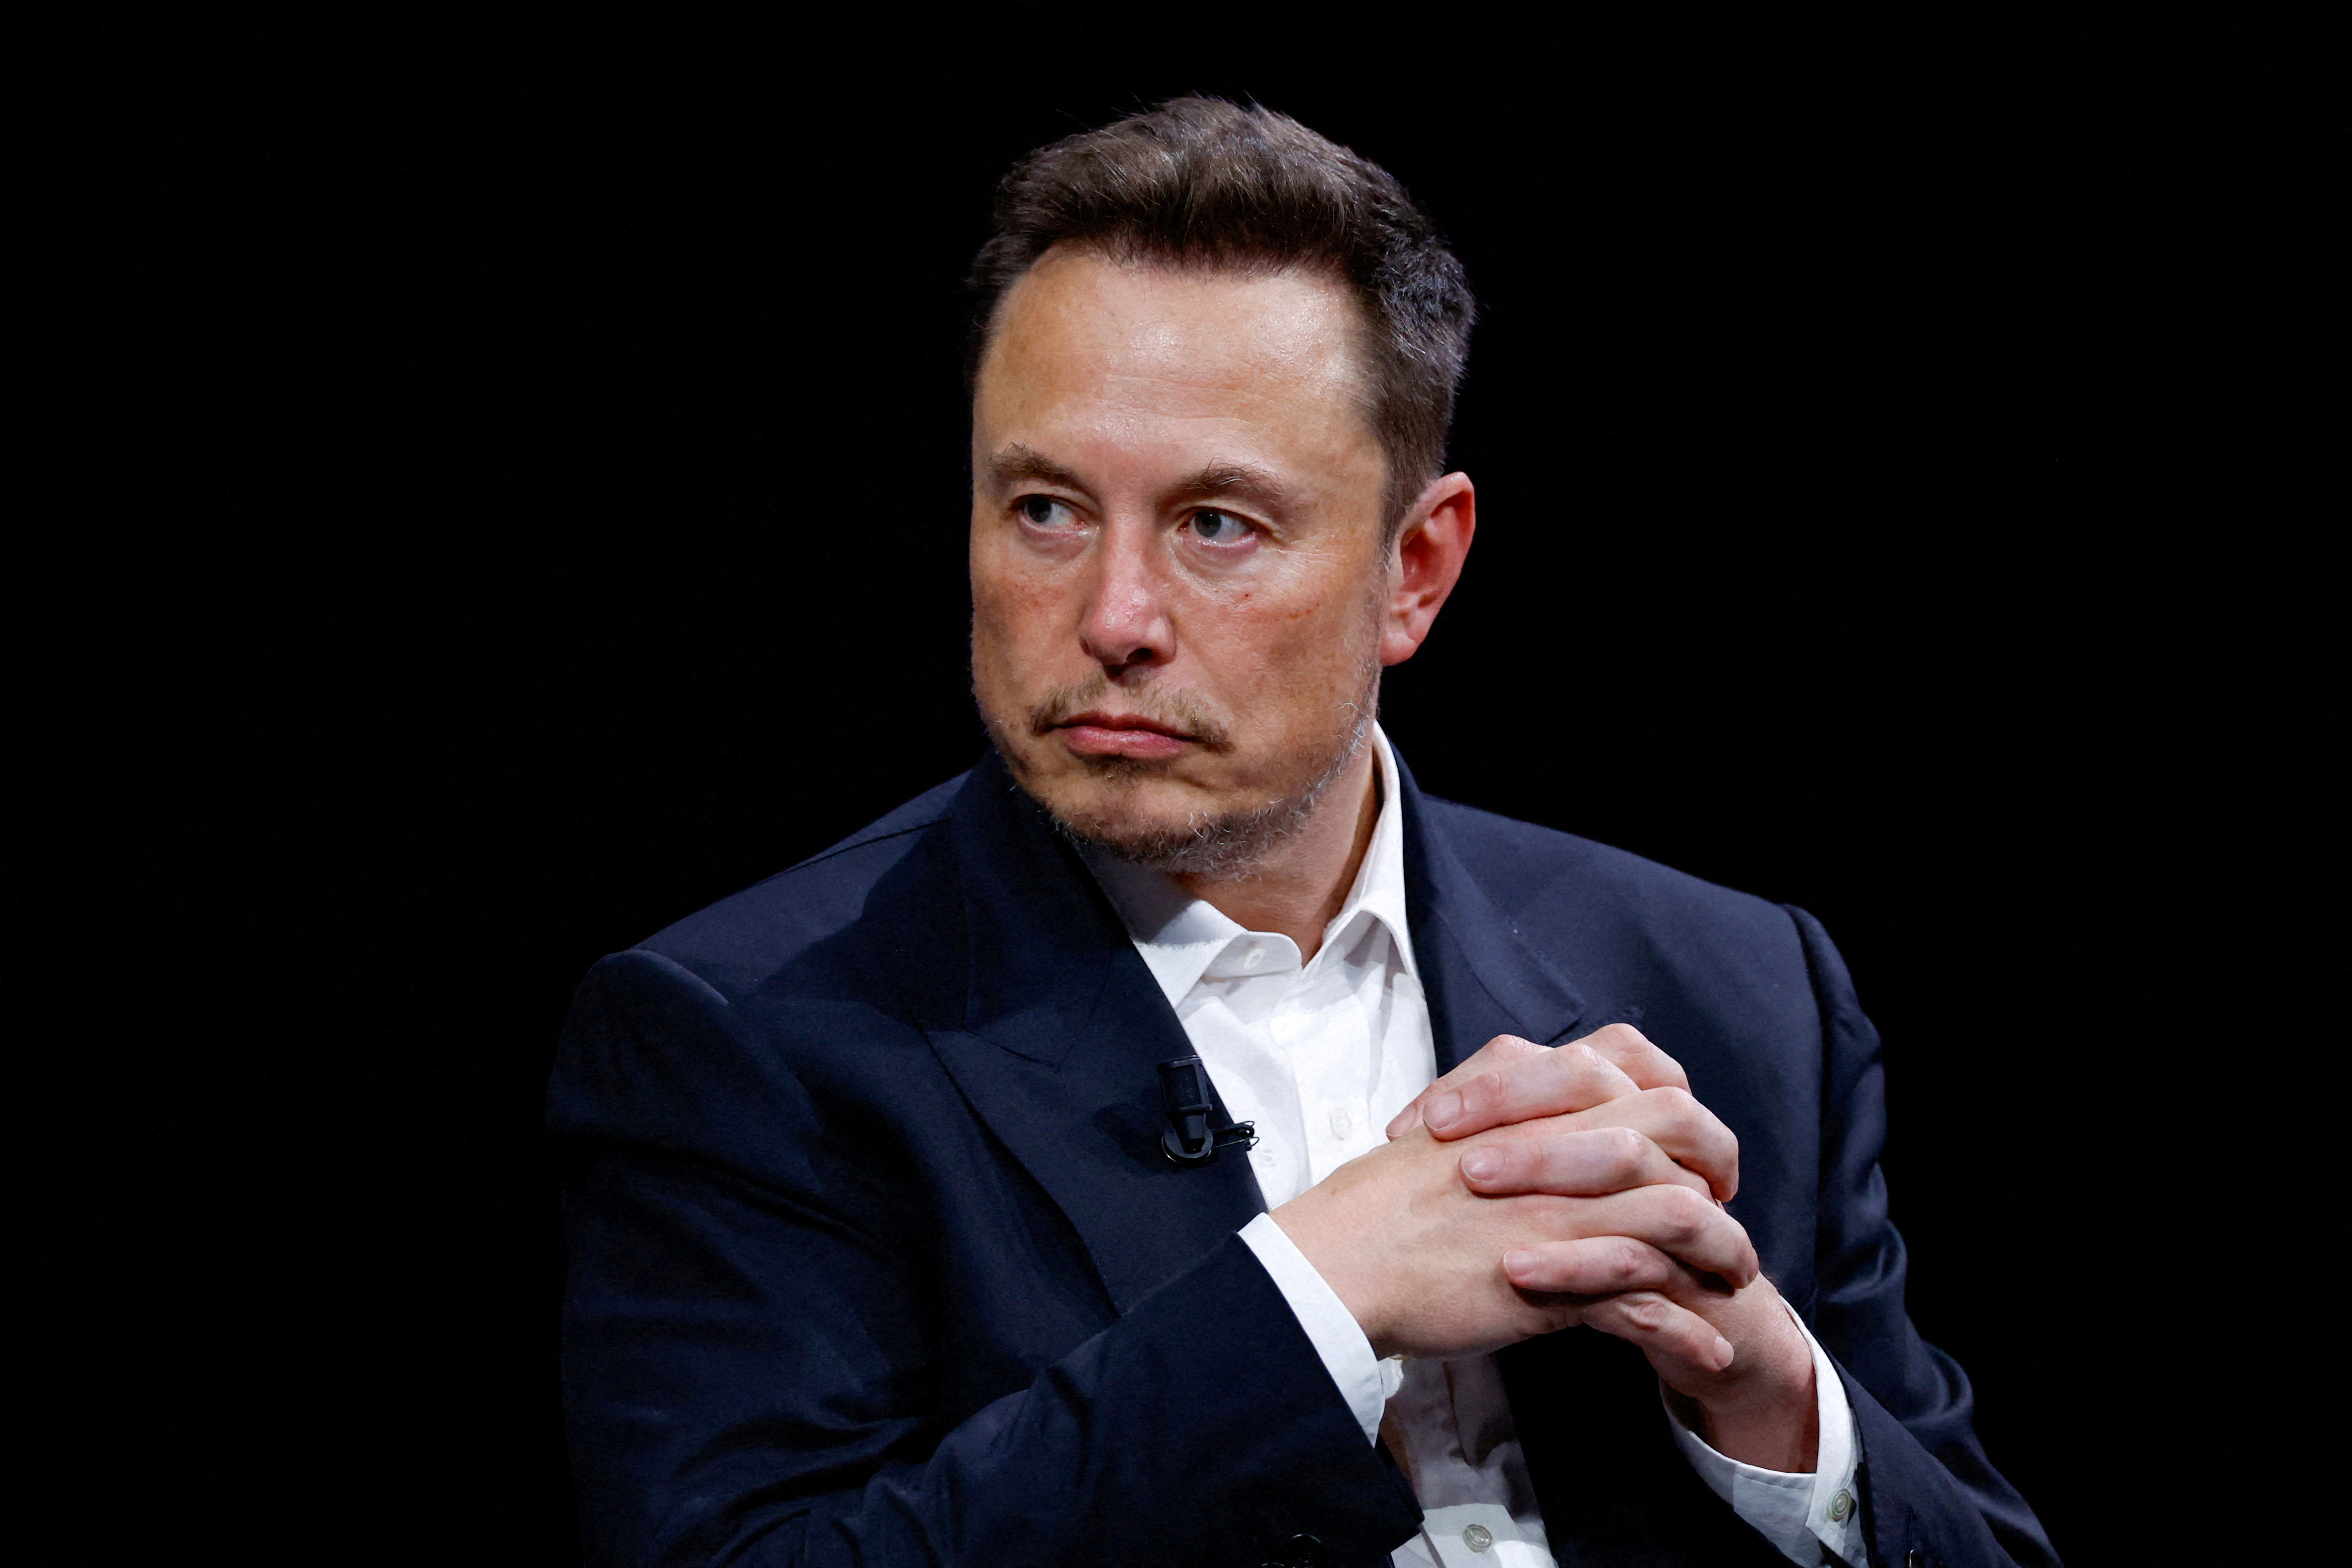 Elon Musk’s AI firm xAI files to raise up to $1 bln in equity offering